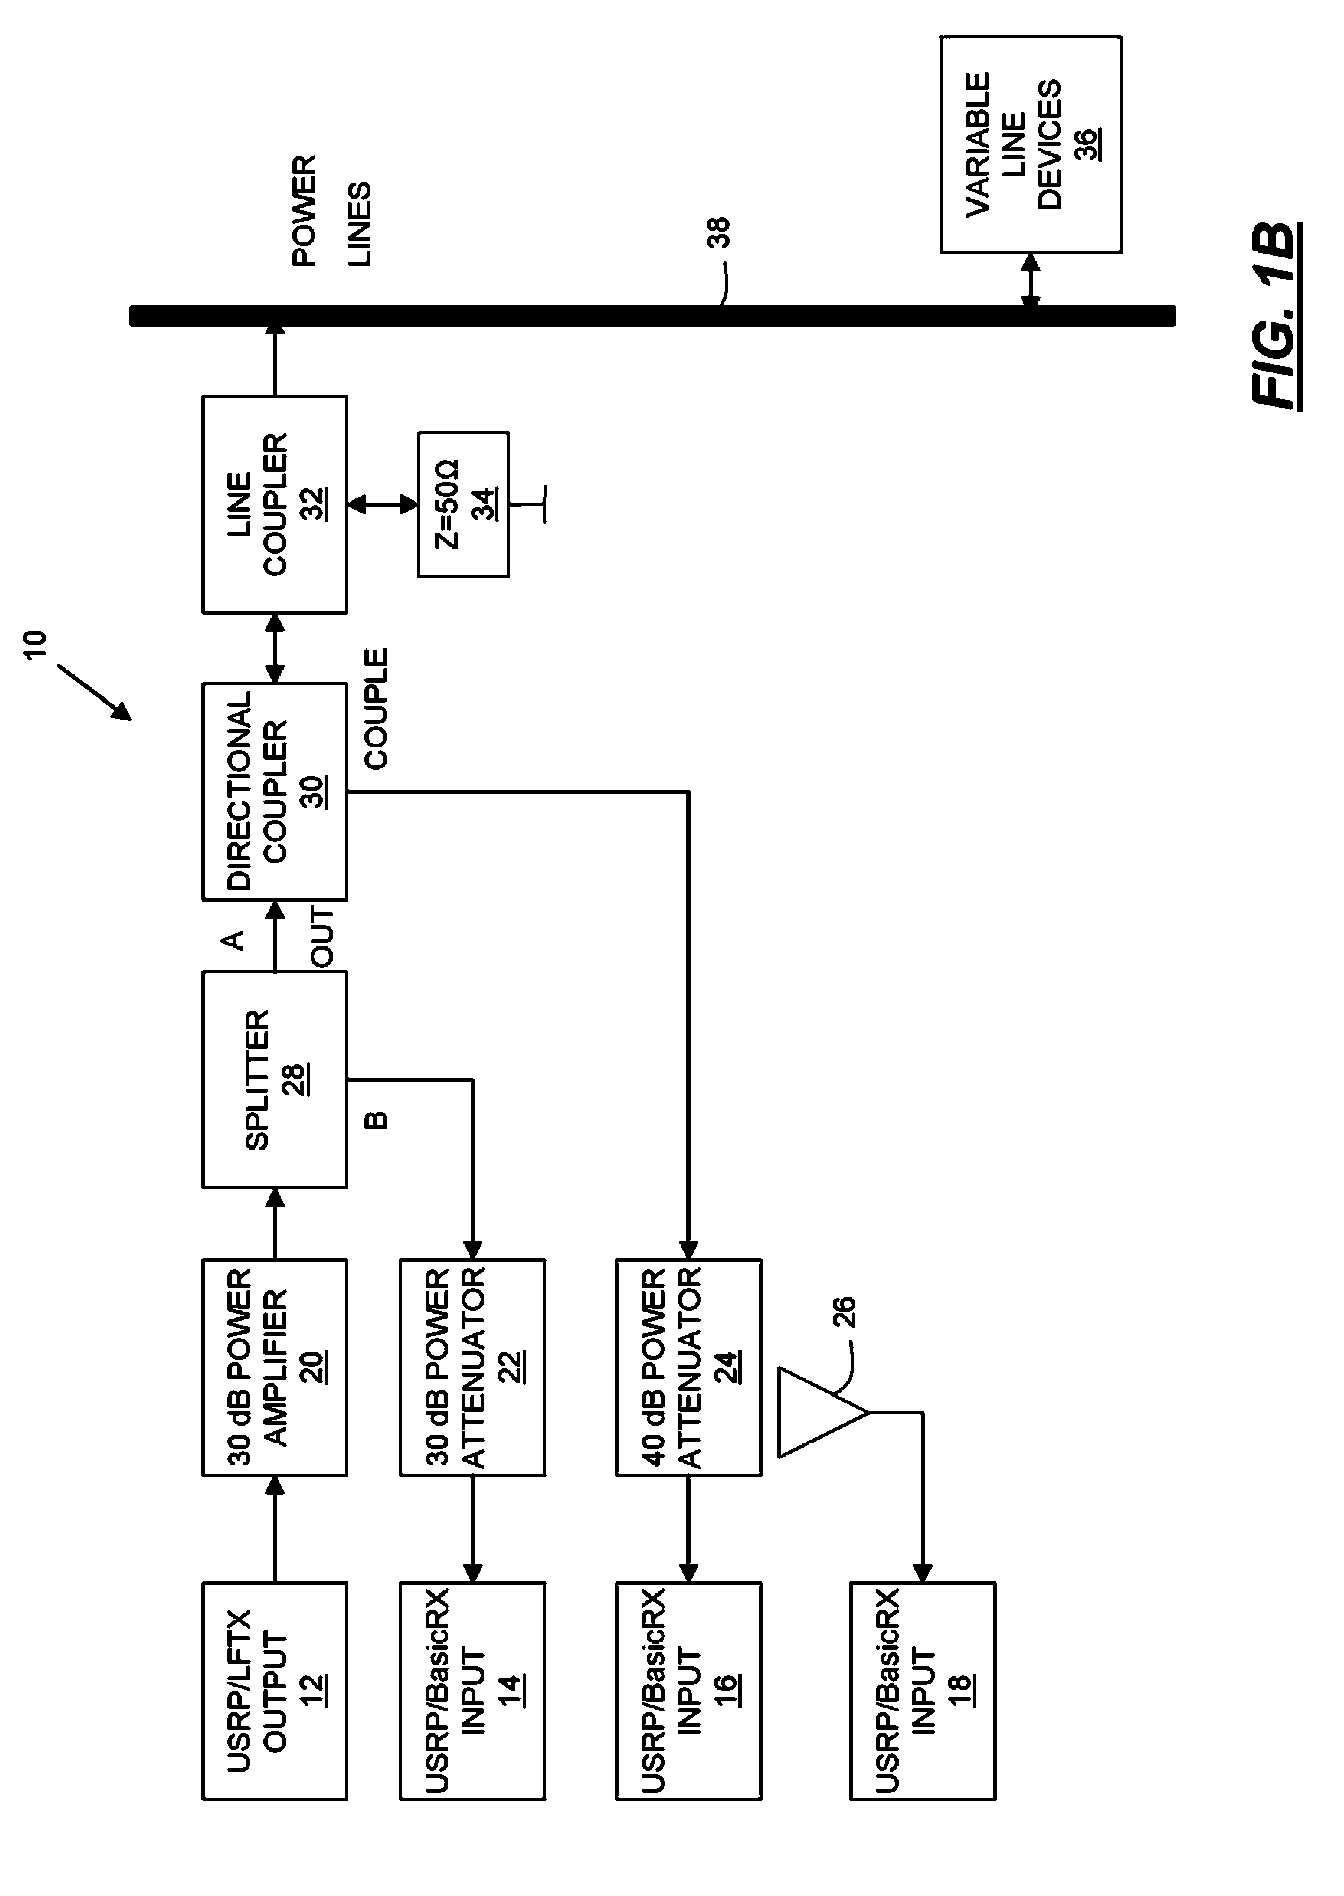 Use of powerlines for transmission of high frequency signals